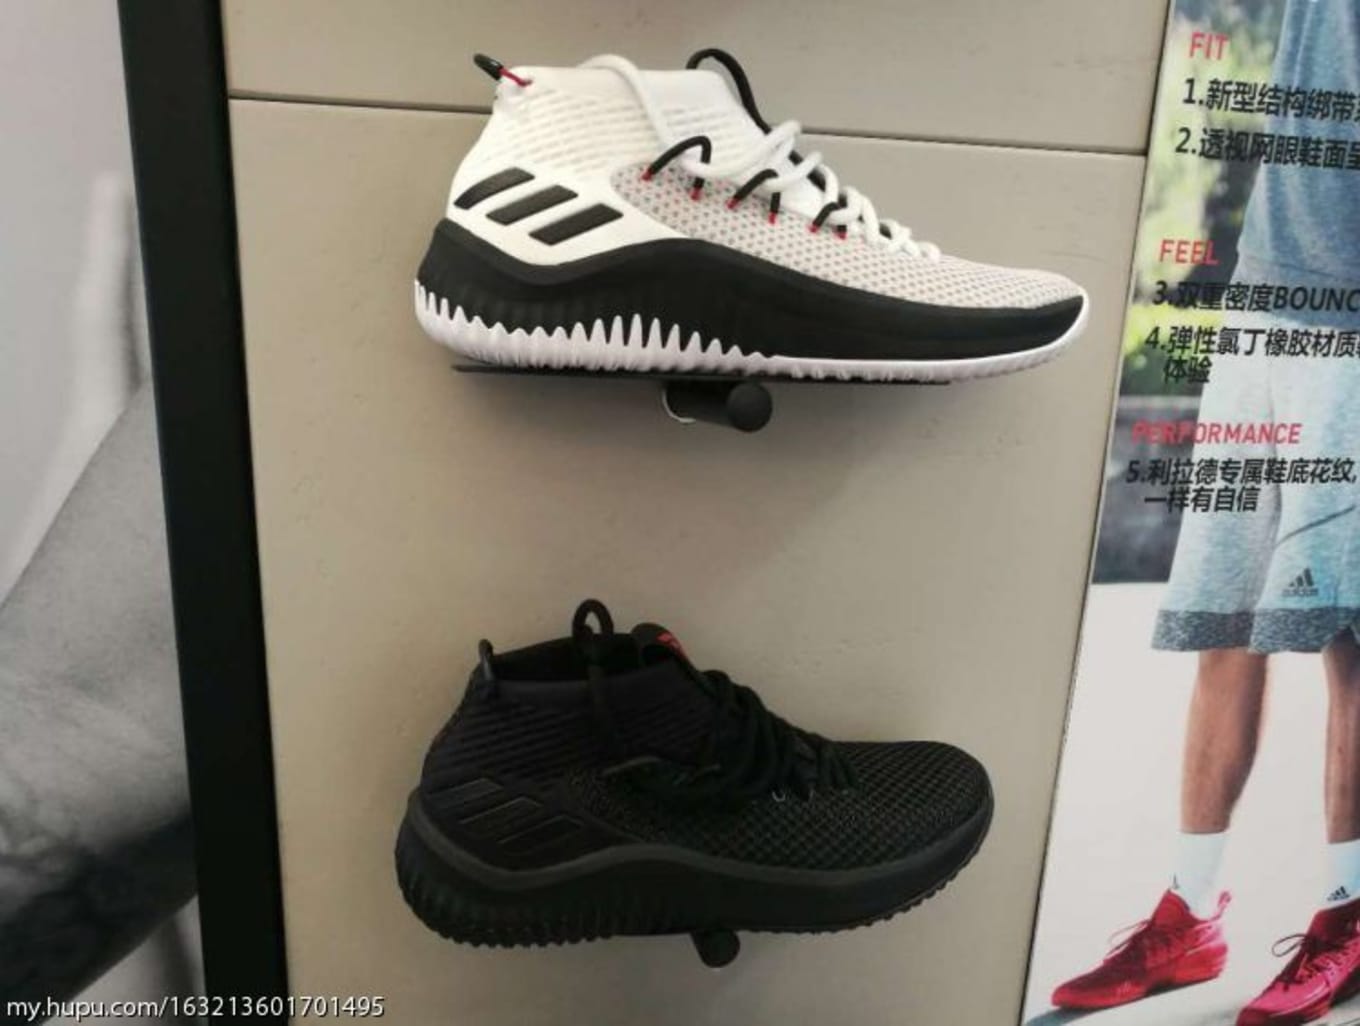 Adidas Dame 4 Release Date | Sole Collector